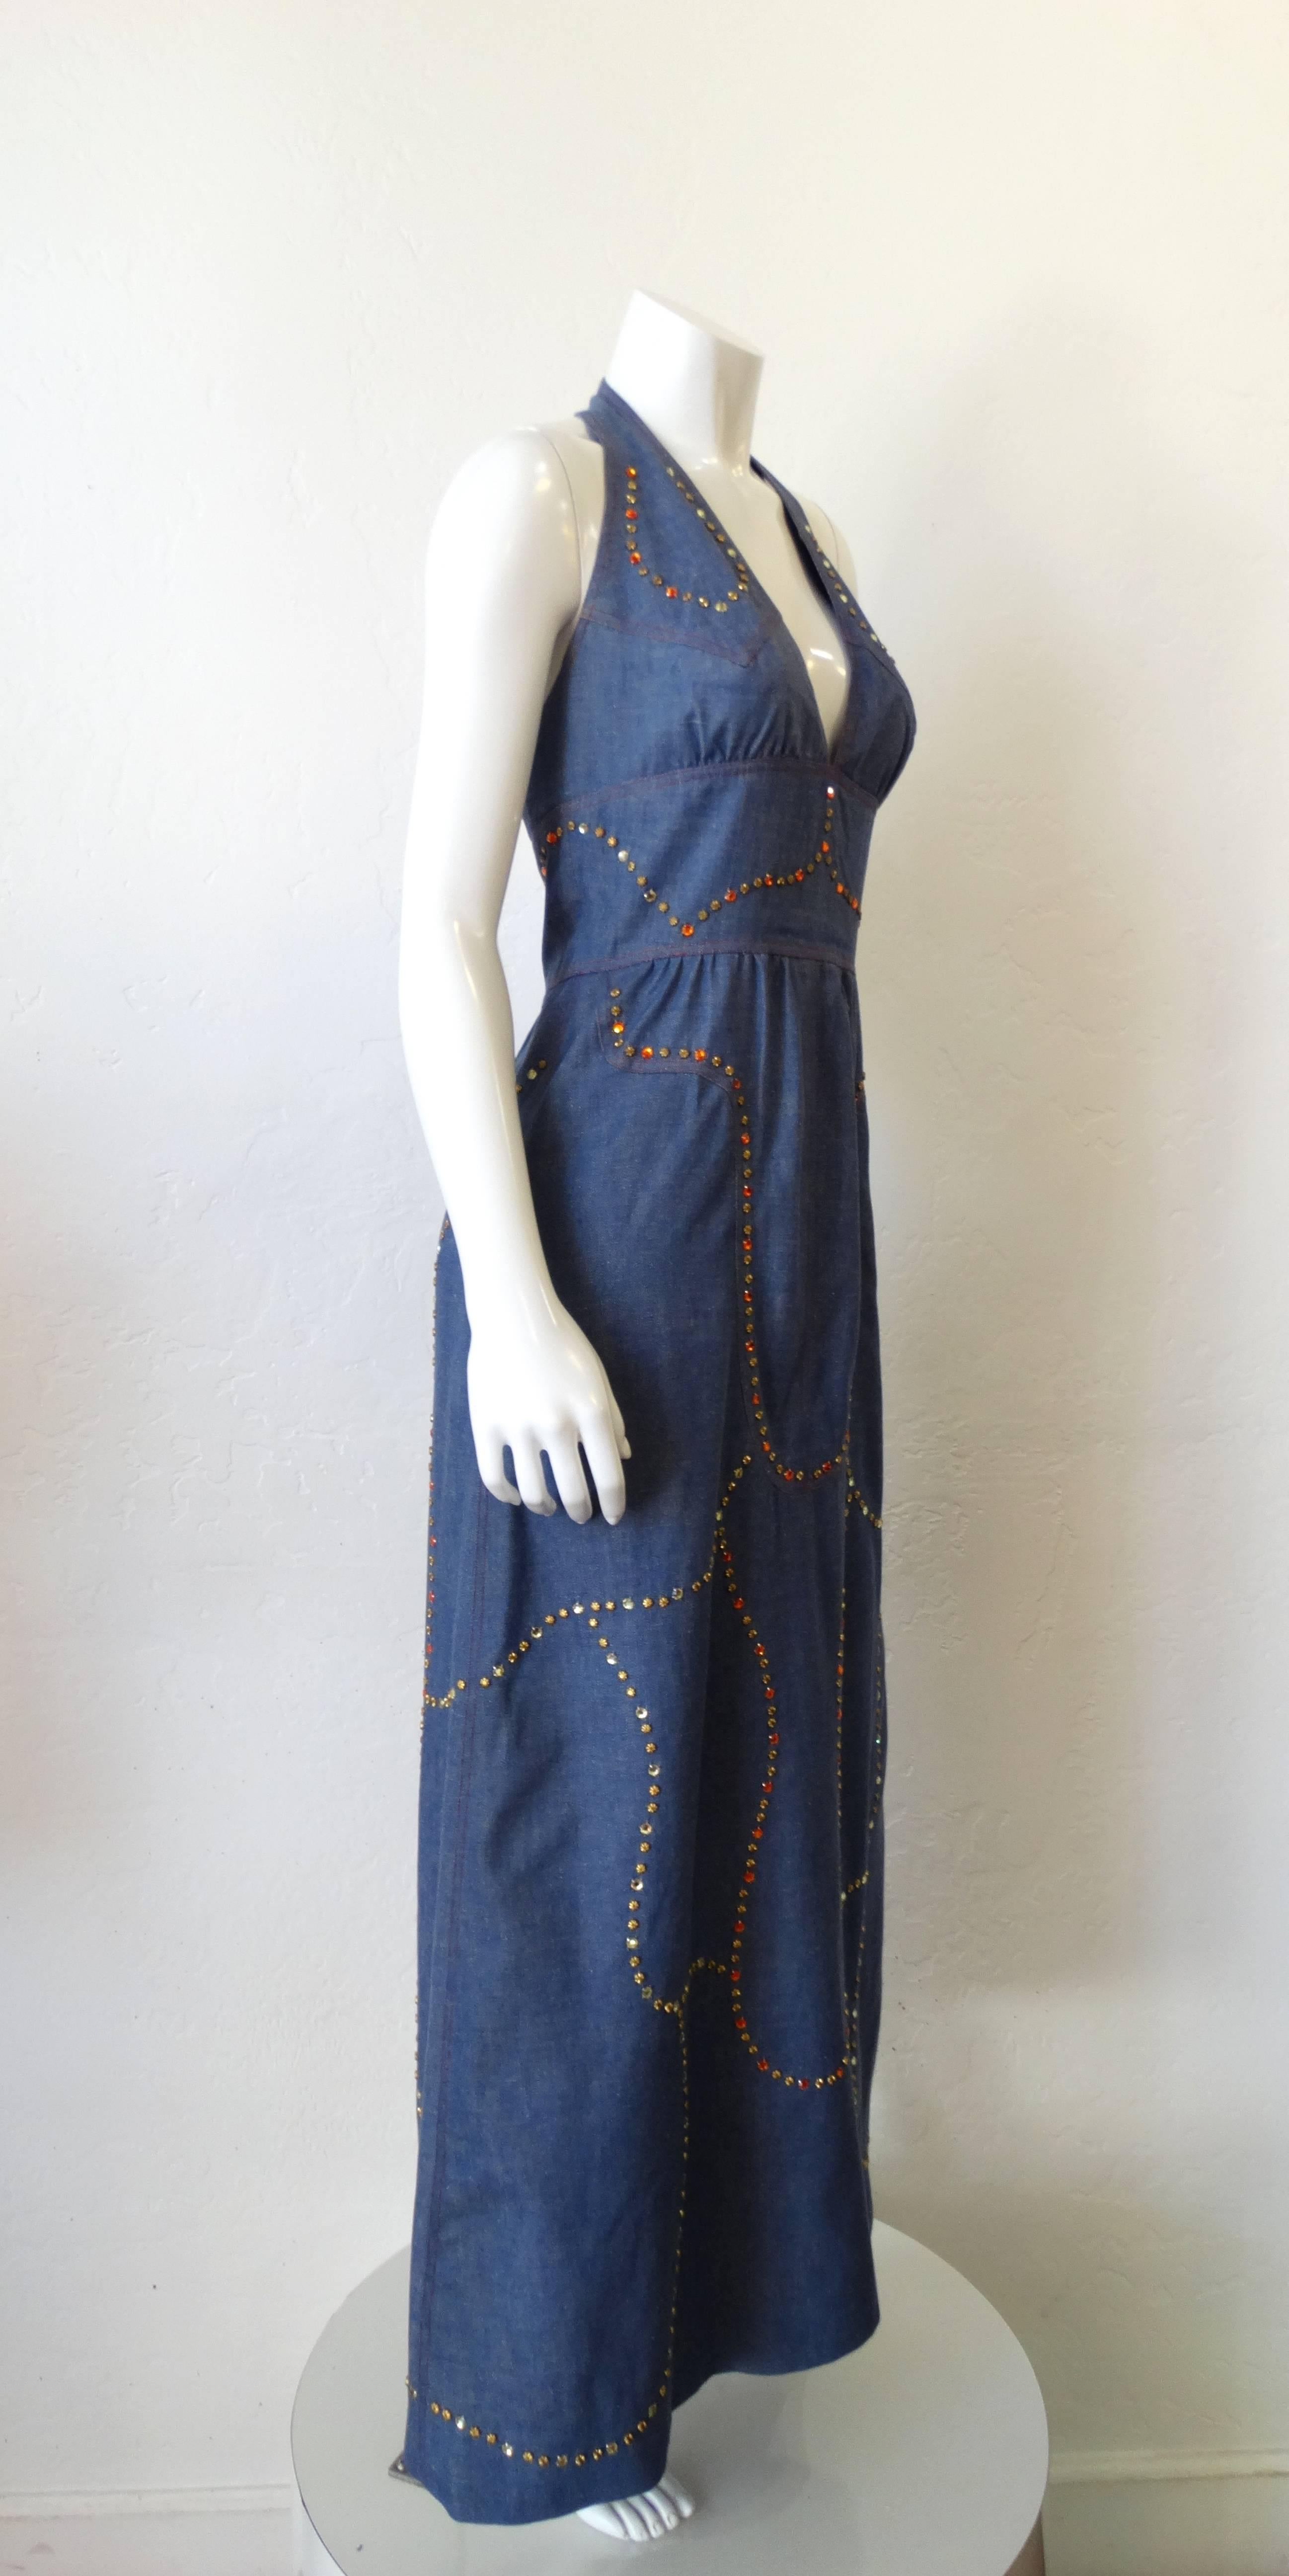 Live like a rhinestone cowgirl in our 1970s denim halter dress! True blue breathable cotton fabric accented with contrasted red stitching, gold studs and orange rhinestones. Sexy halter neckline and flattering empire waist with a maxi length skirt.